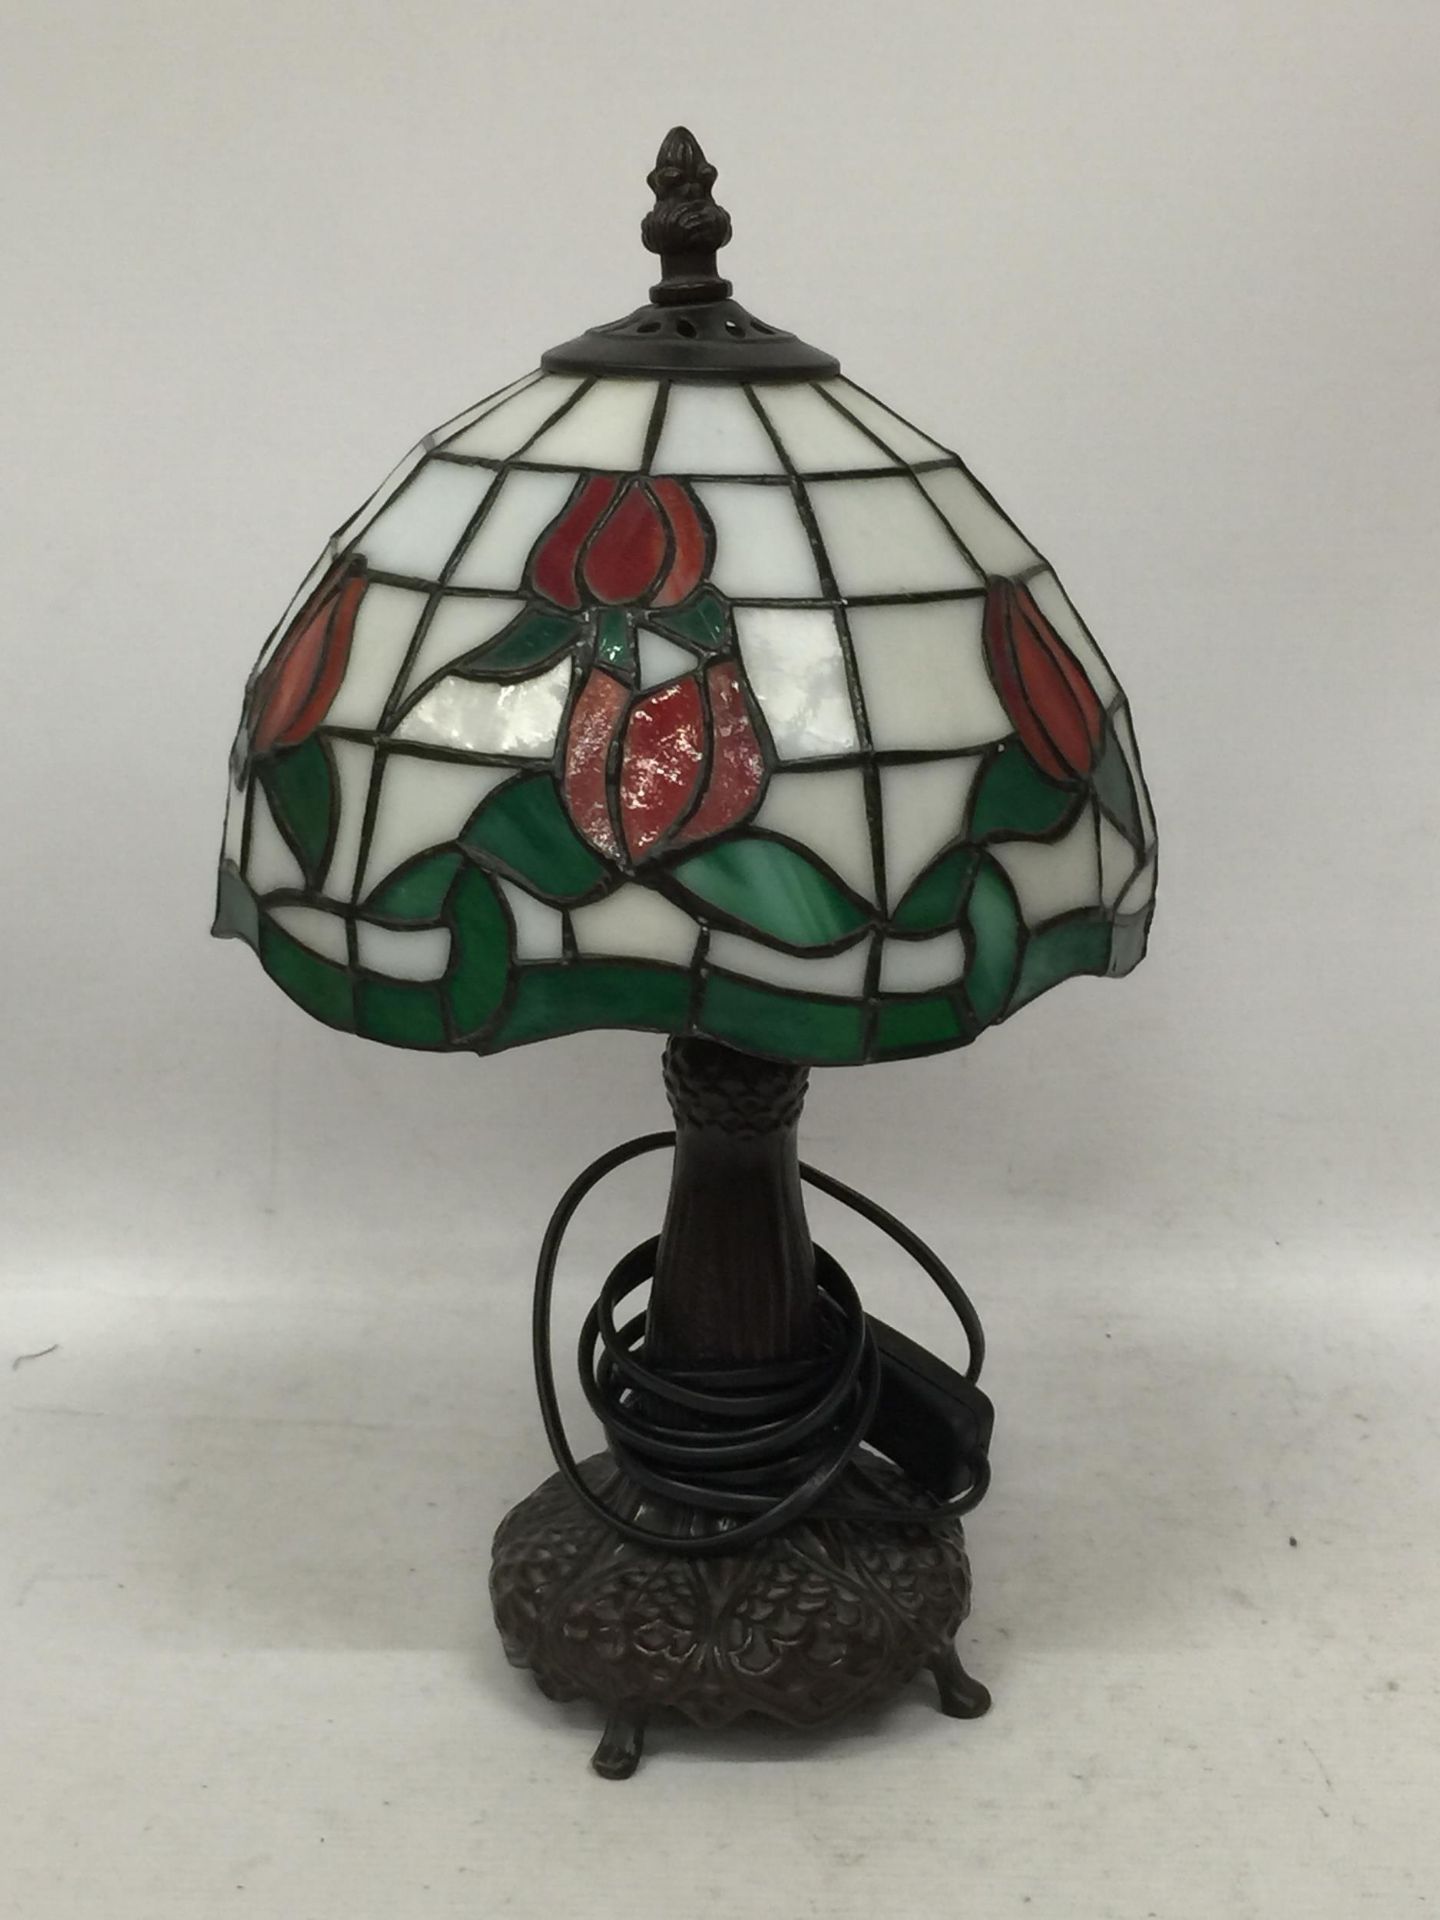 A TIFFANY STYLE TABLE LAMP AND SHADE